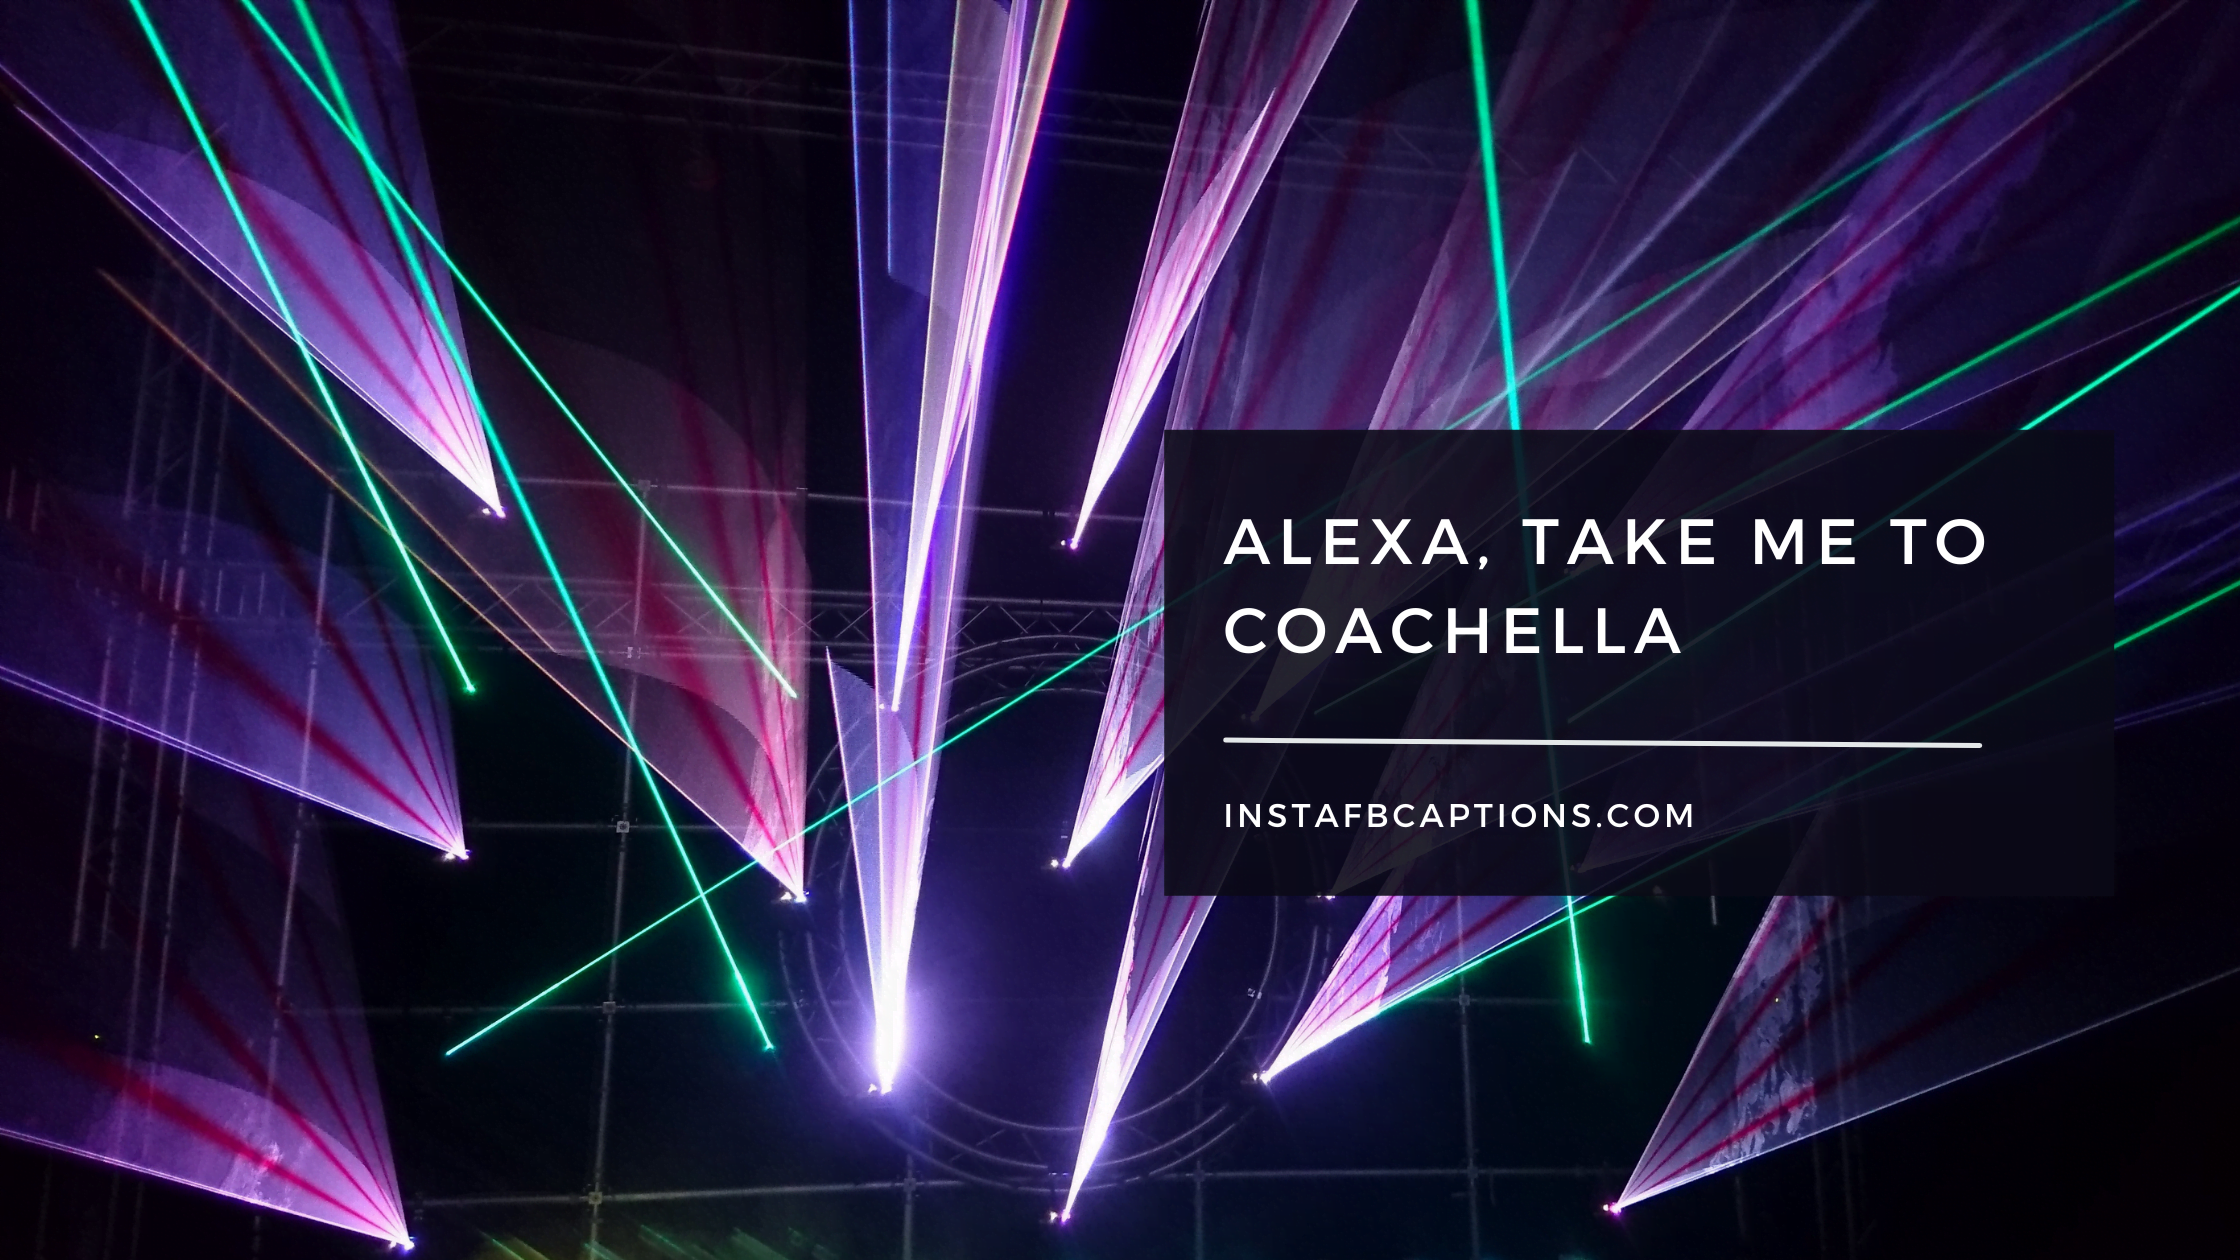 Some Witty Coachella Captions  - Some Witty Coachella Captions  - Best Coachella Instagram Captions in 2022